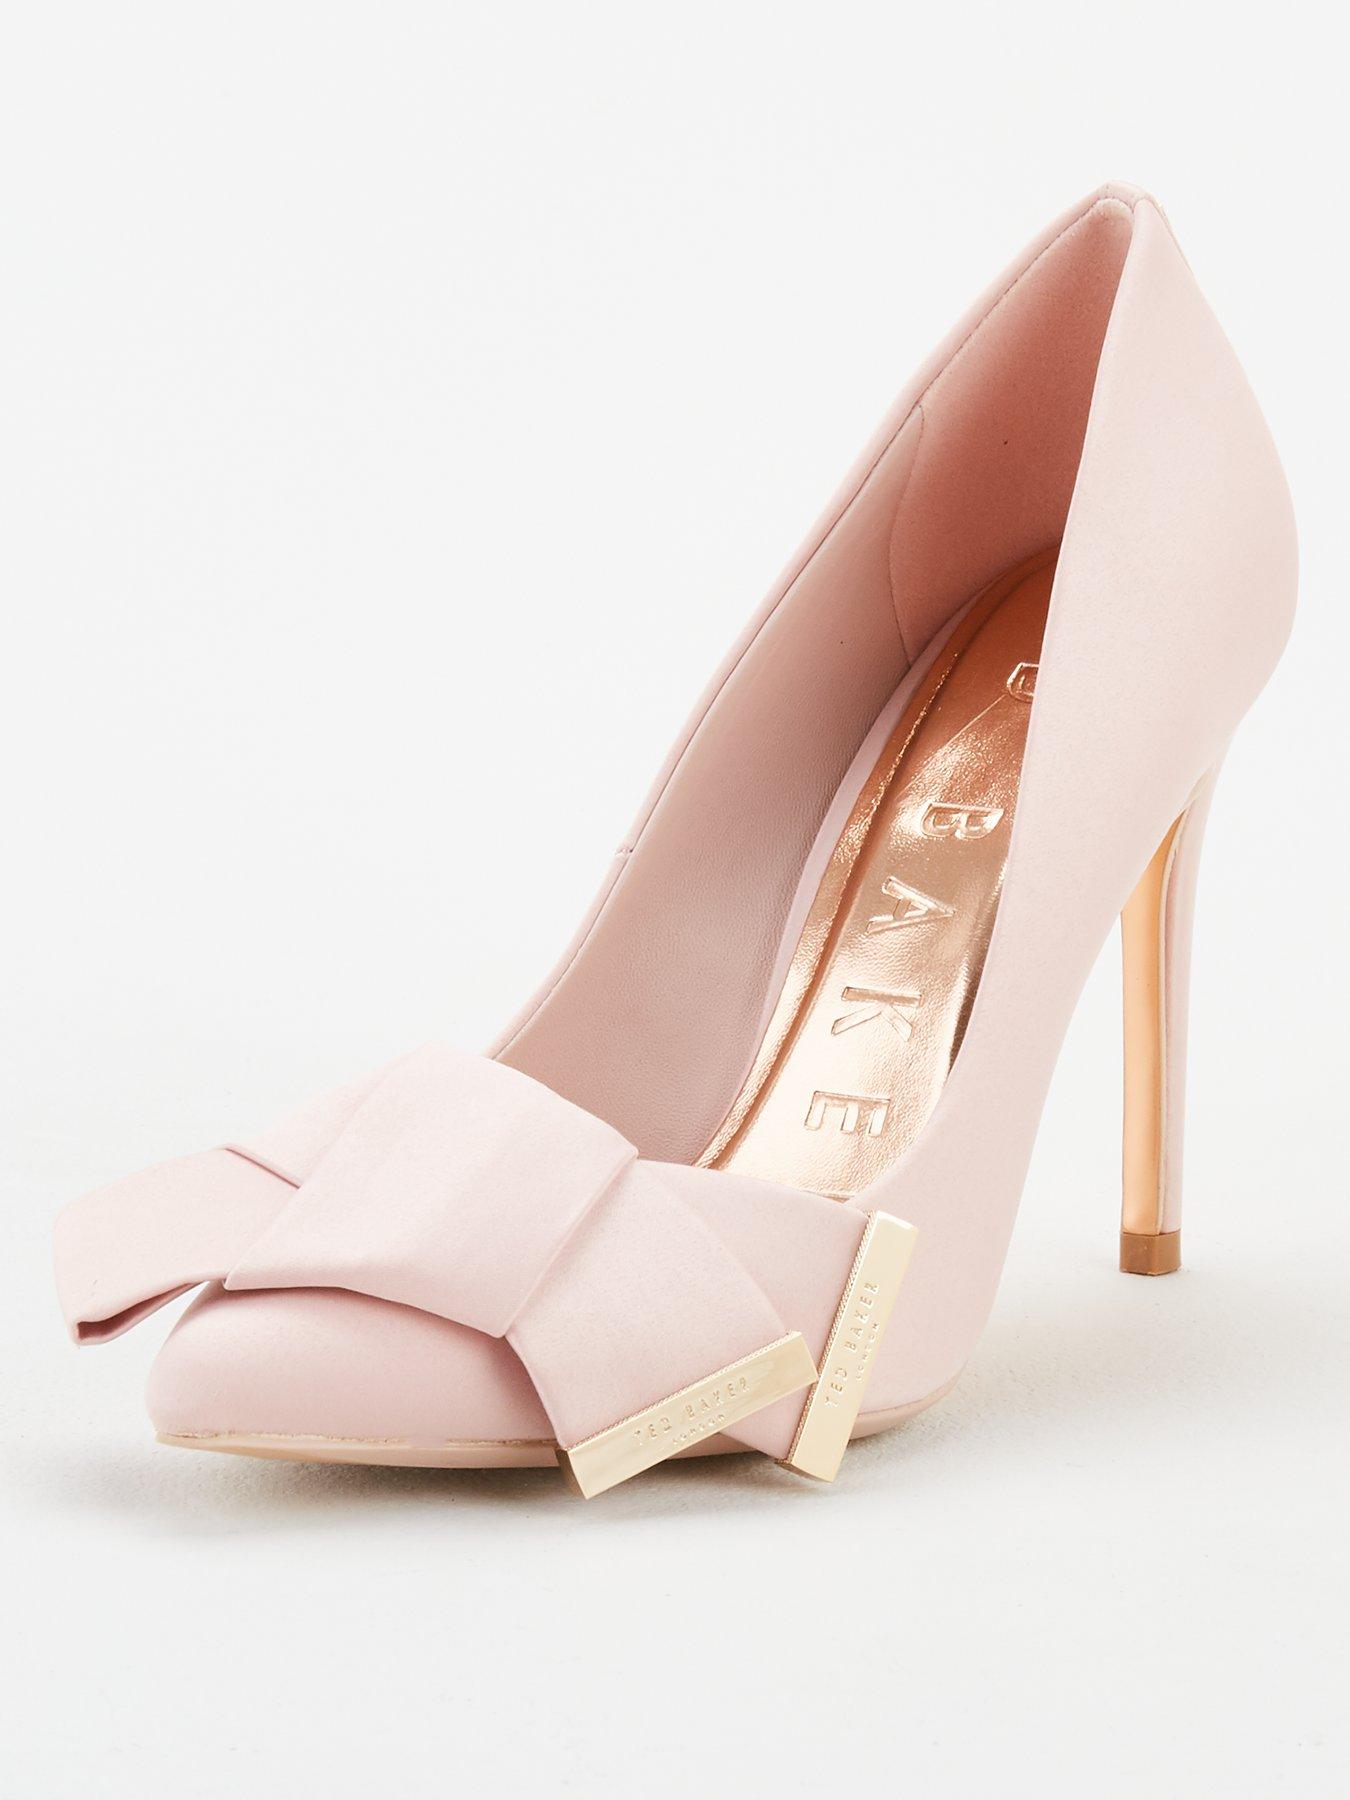 ted baker bow heels pink